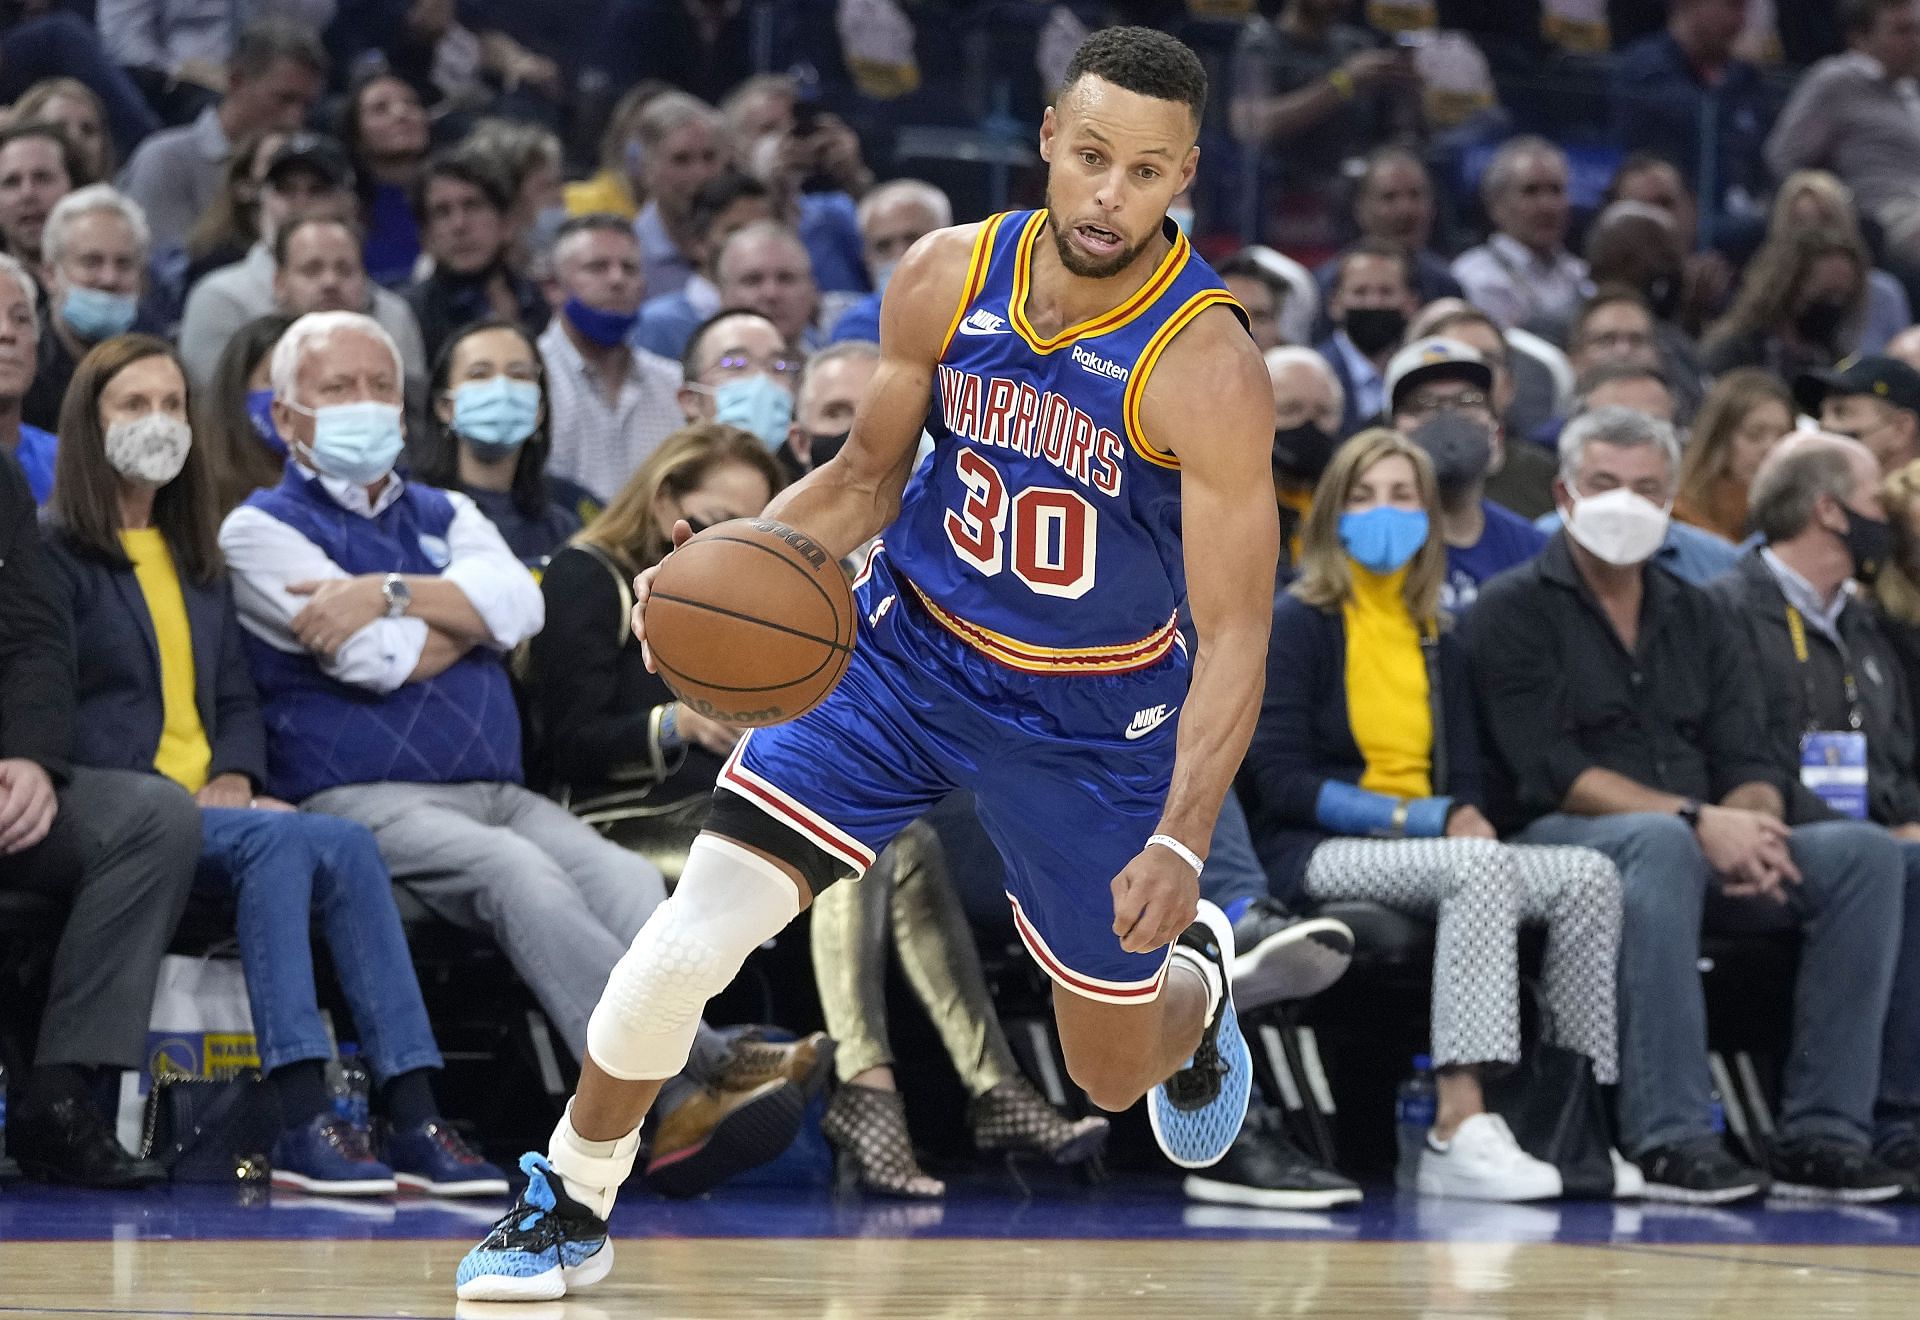 Steph Curry is arguably the best point guard in the league.